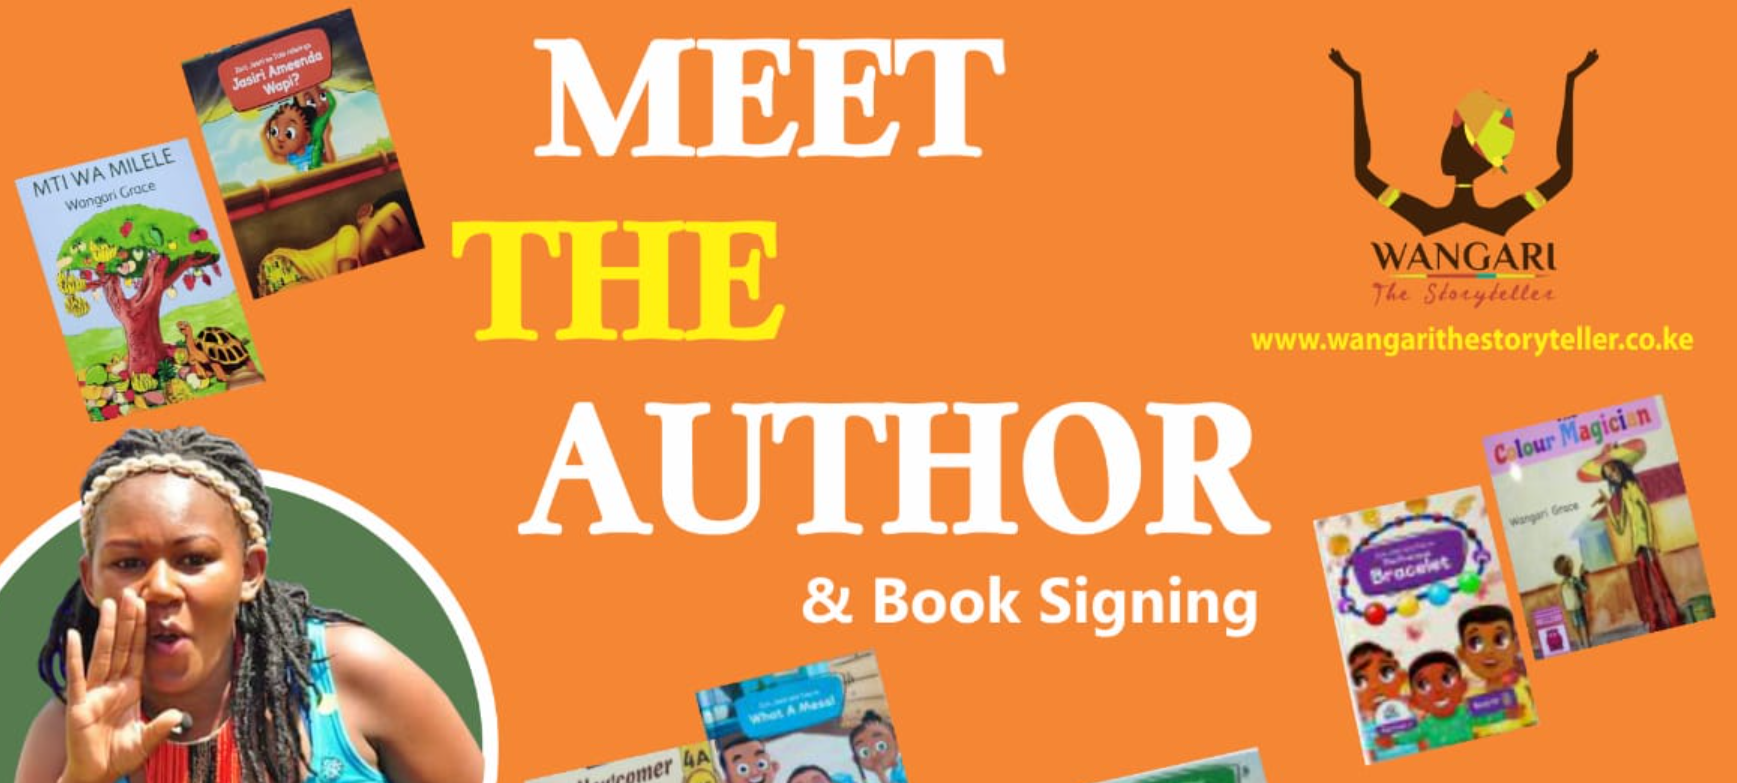 Meet the author: 'Wangari the Storyteller' book signing event at Alliance Fran&Atilde;&sect;aise